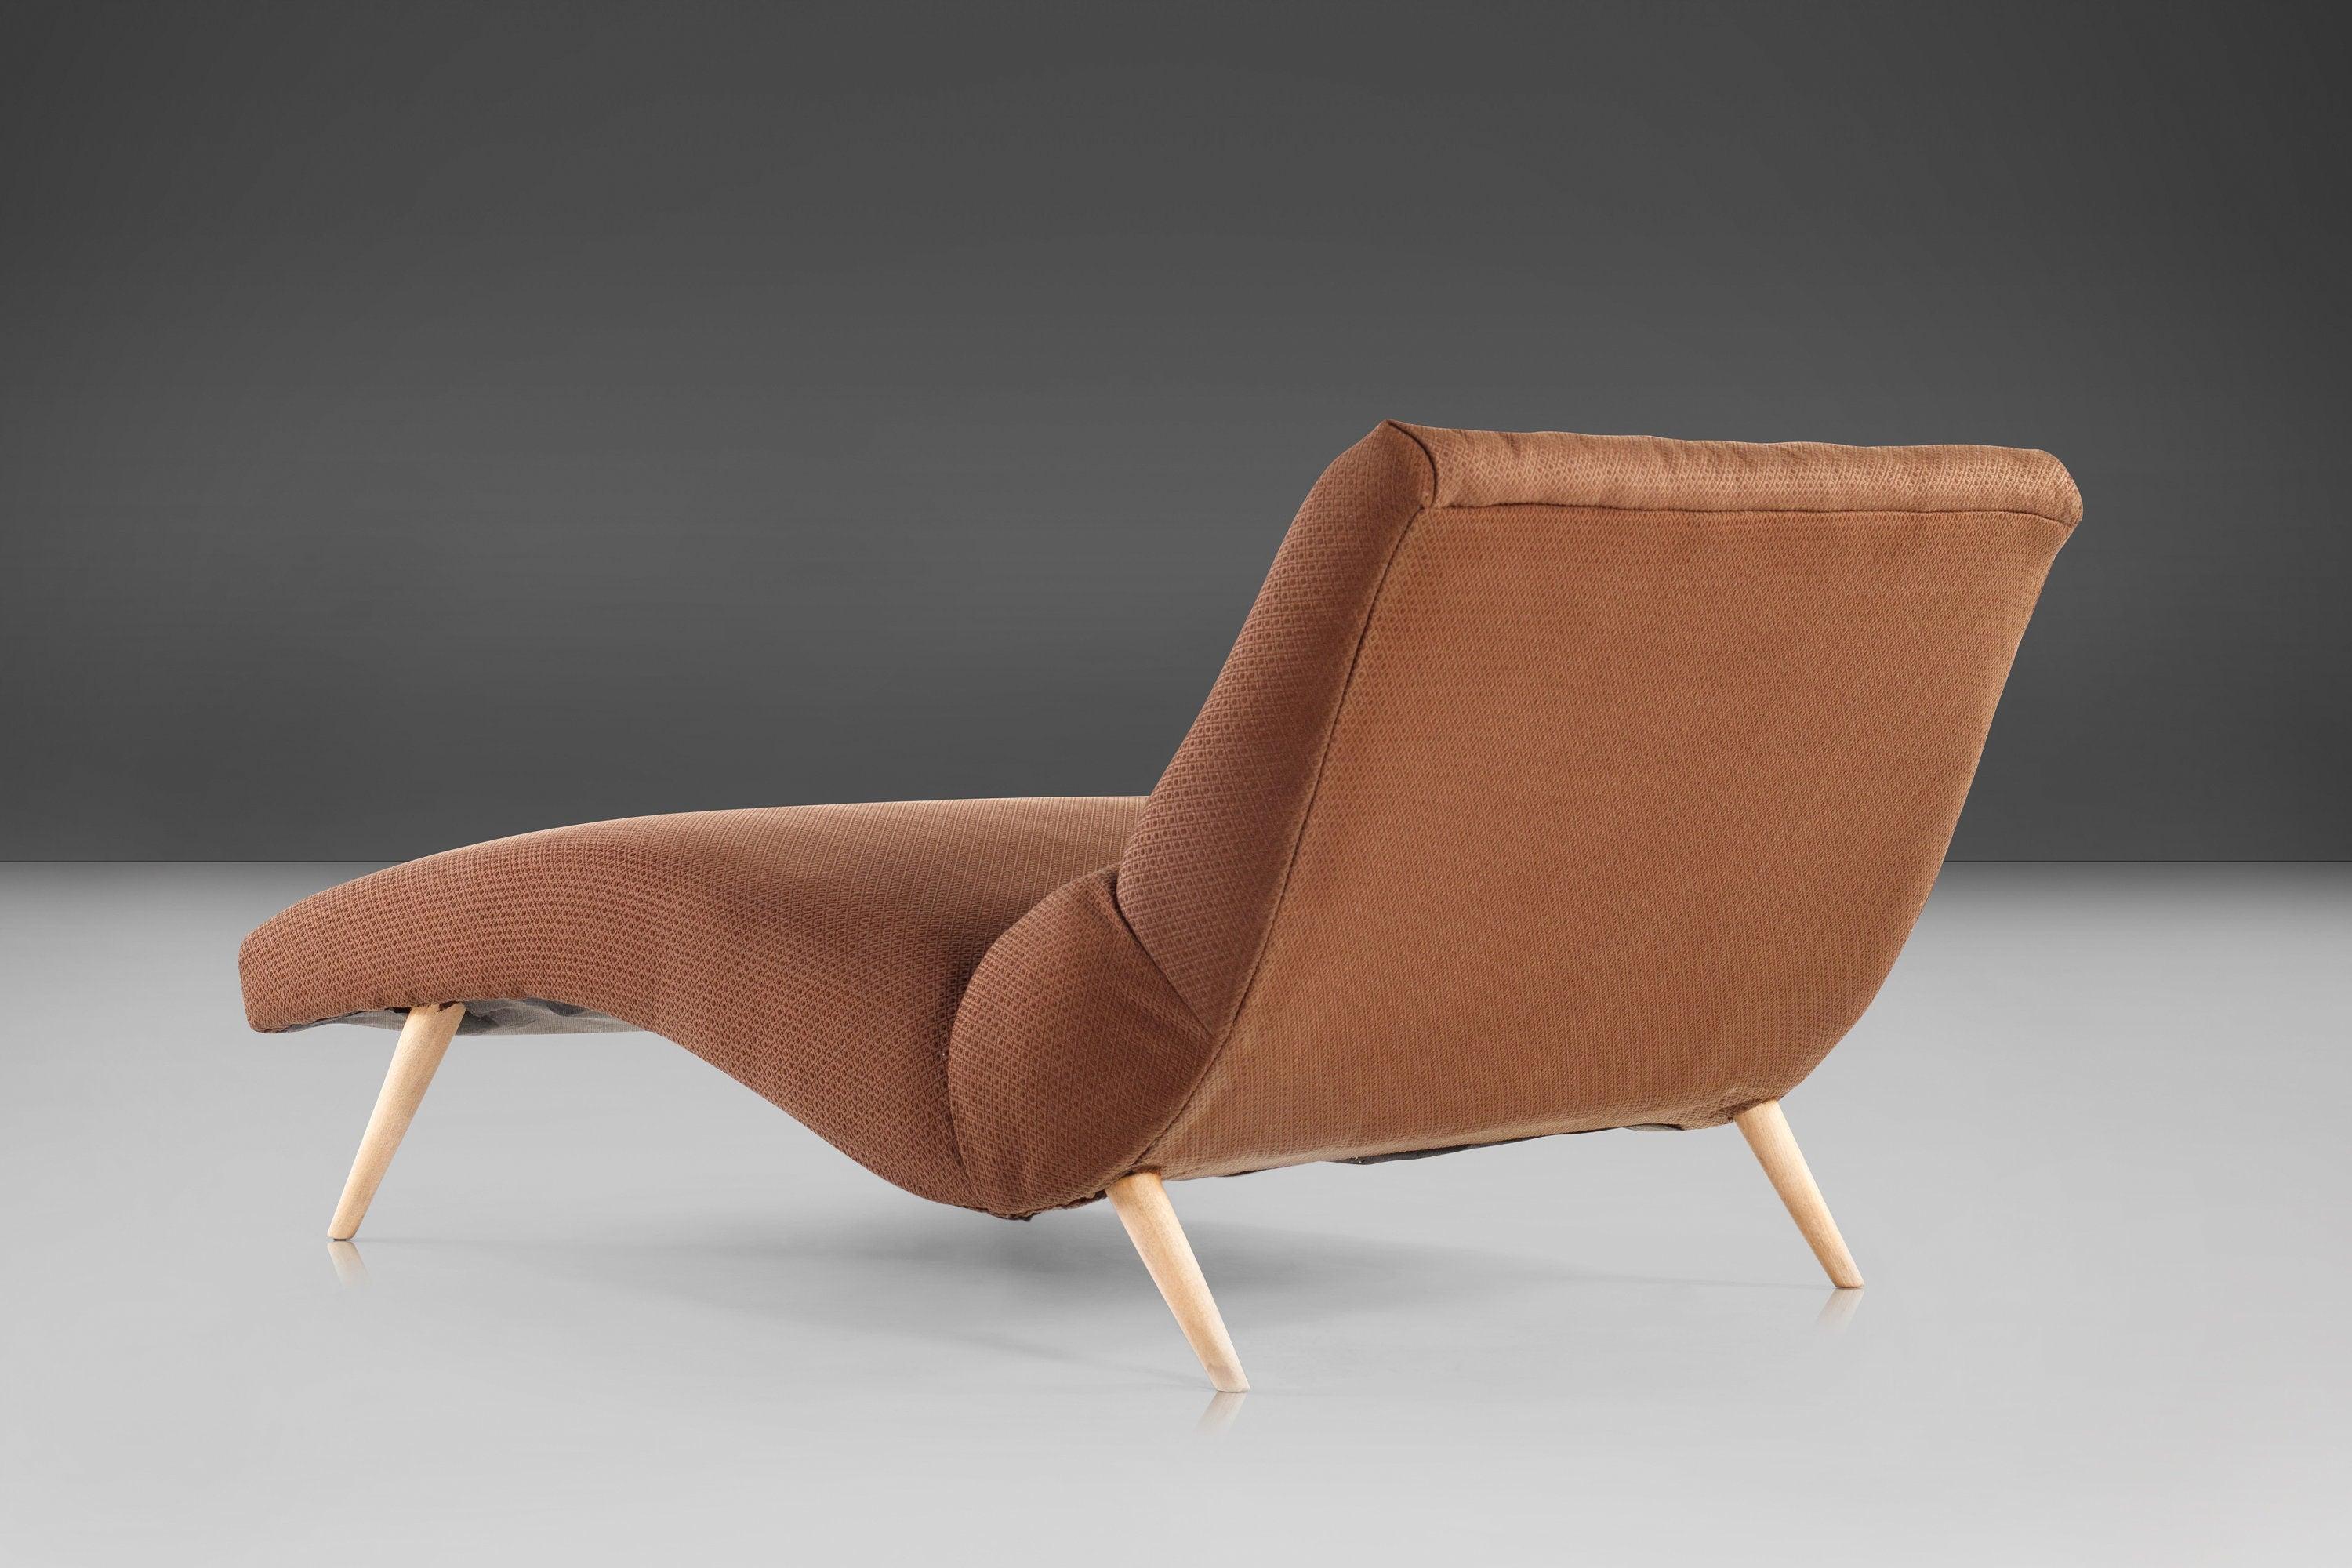 Architectural Wave Chaise Lounge Chair by Lawrence Peabody for Selig, c. 1960s In Good Condition For Sale In Deland, FL